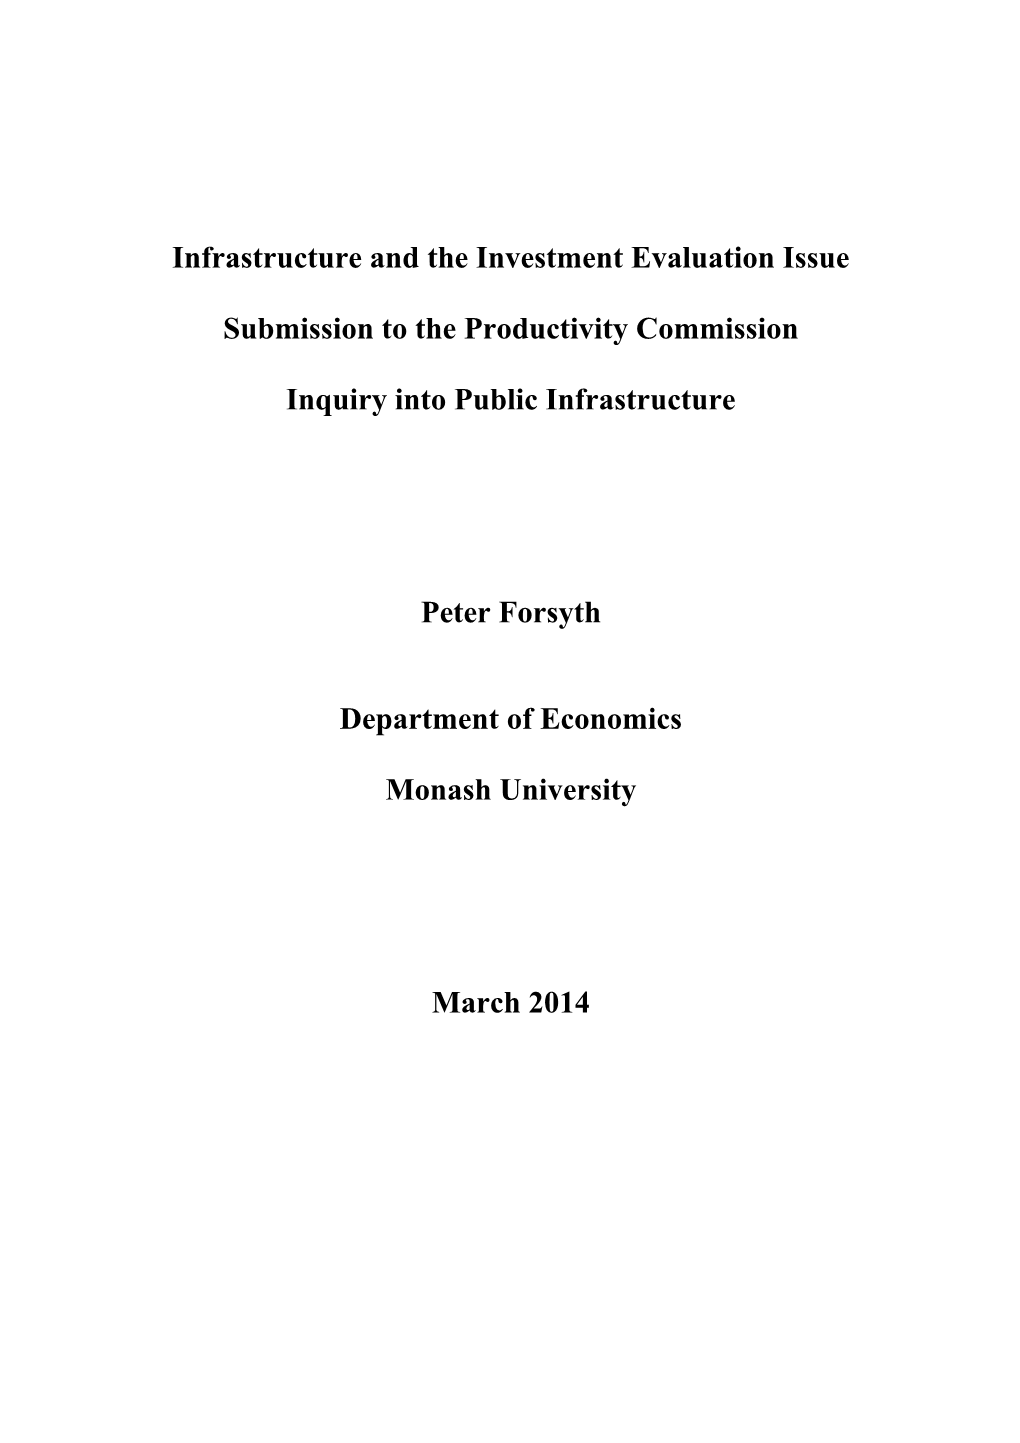 Submission DR117 - Peter Forsyth - Public Infrastructure - Public Inquiry